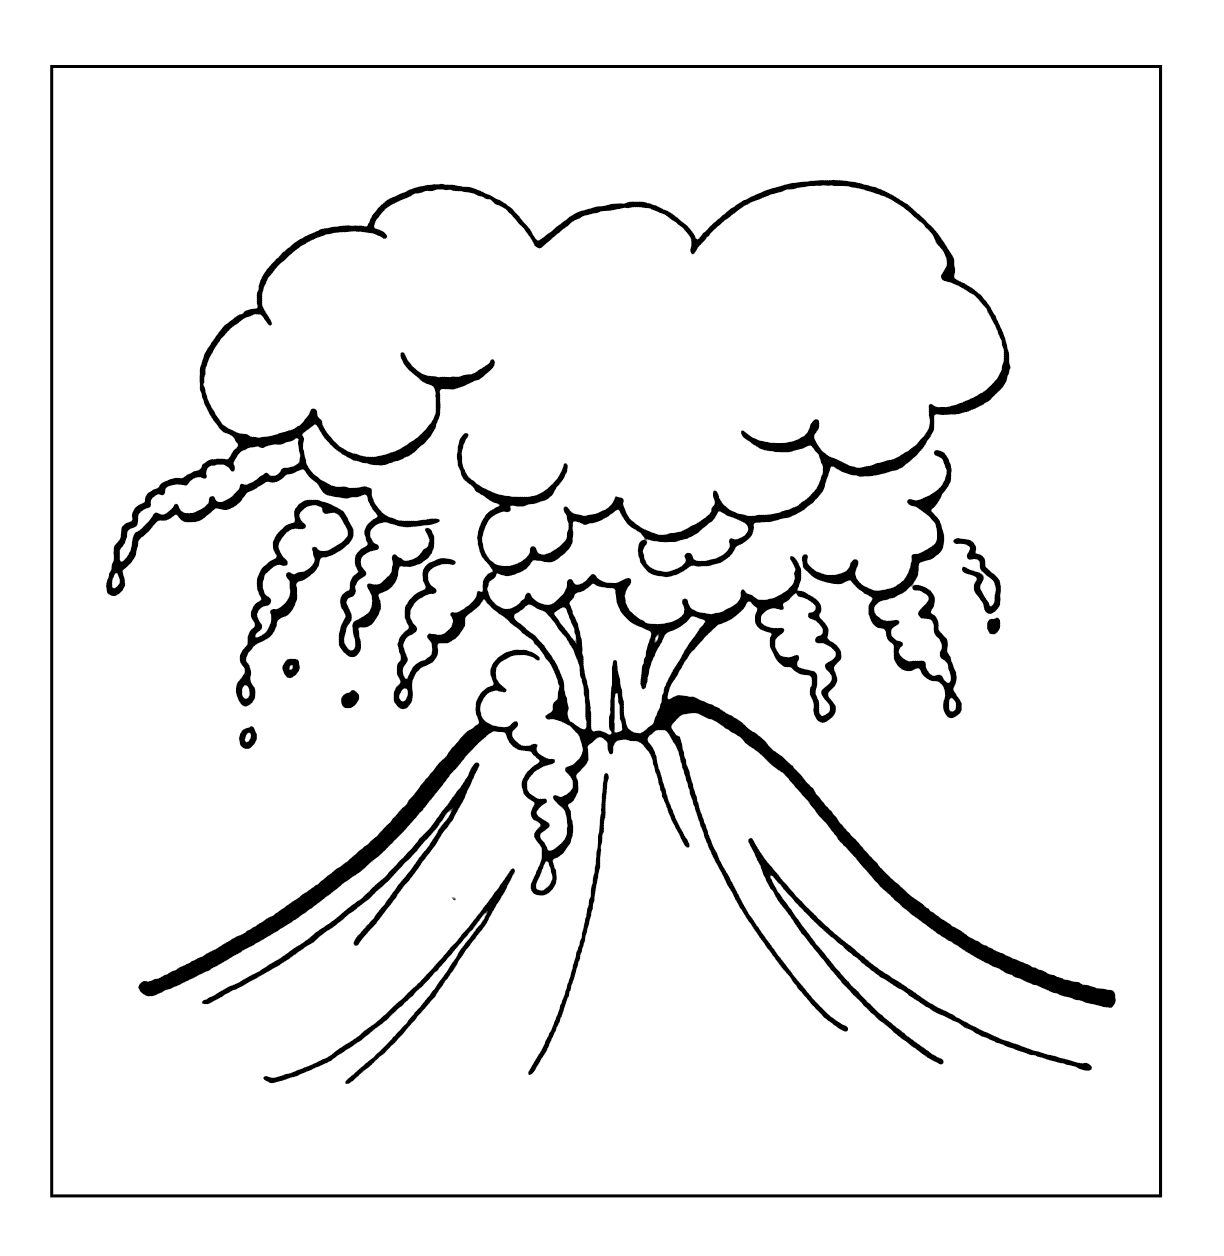 Volcano Erupting Coloring Page